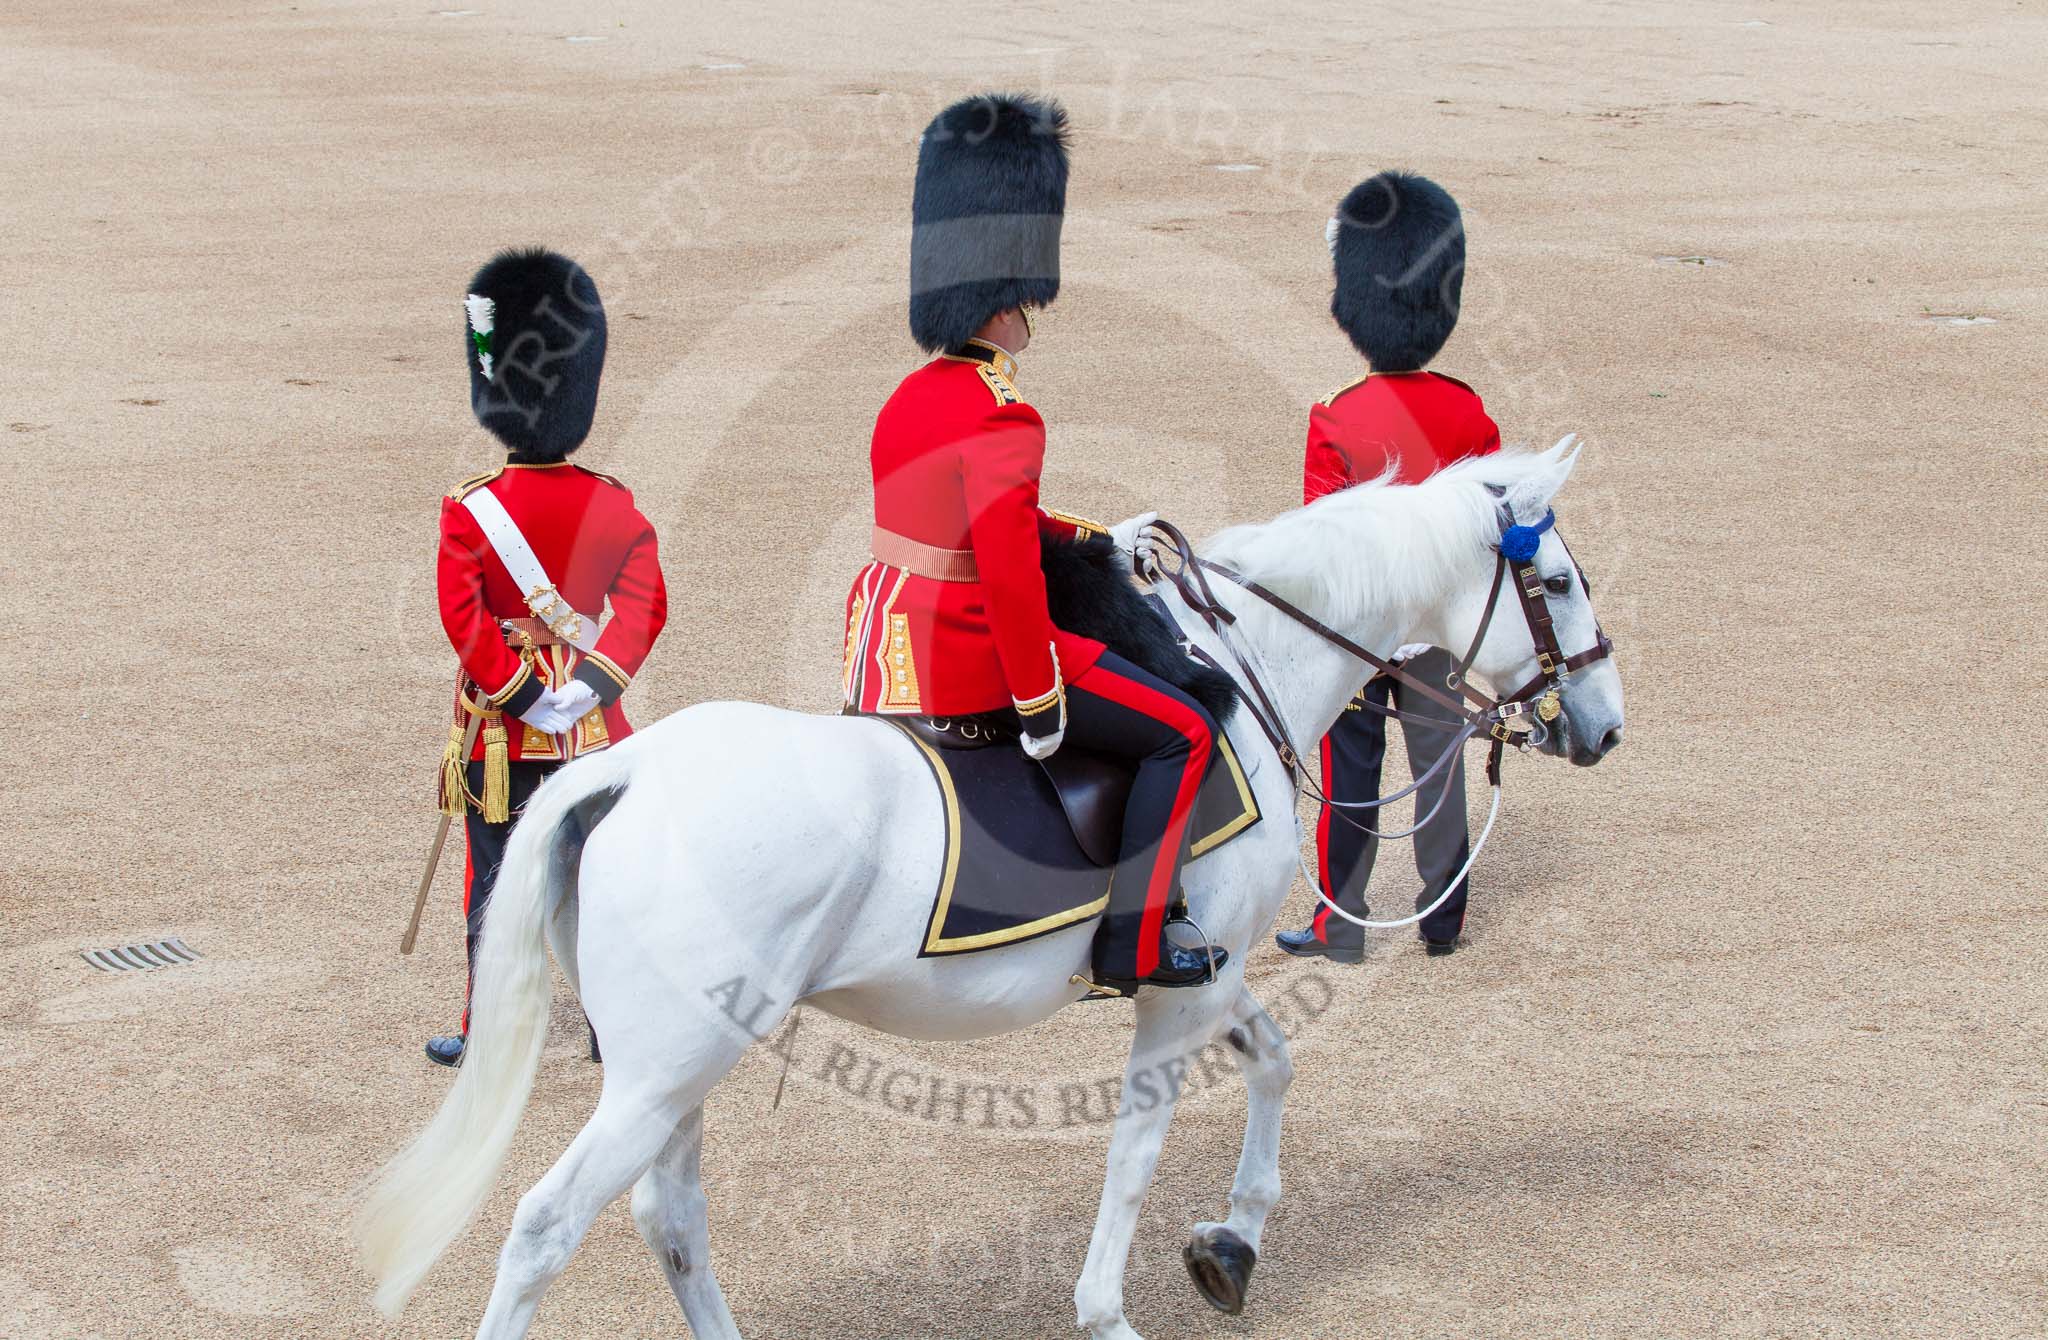 Trooping the Colour 2013: The Adjutant of the Parade, Captain C J P Davies, Welsh Guards, riding behind the line of 18 officers, here passing the Ensign with the white colour belt. Image #151, 15 June 2013 10:39 Horse Guards Parade, London, UK